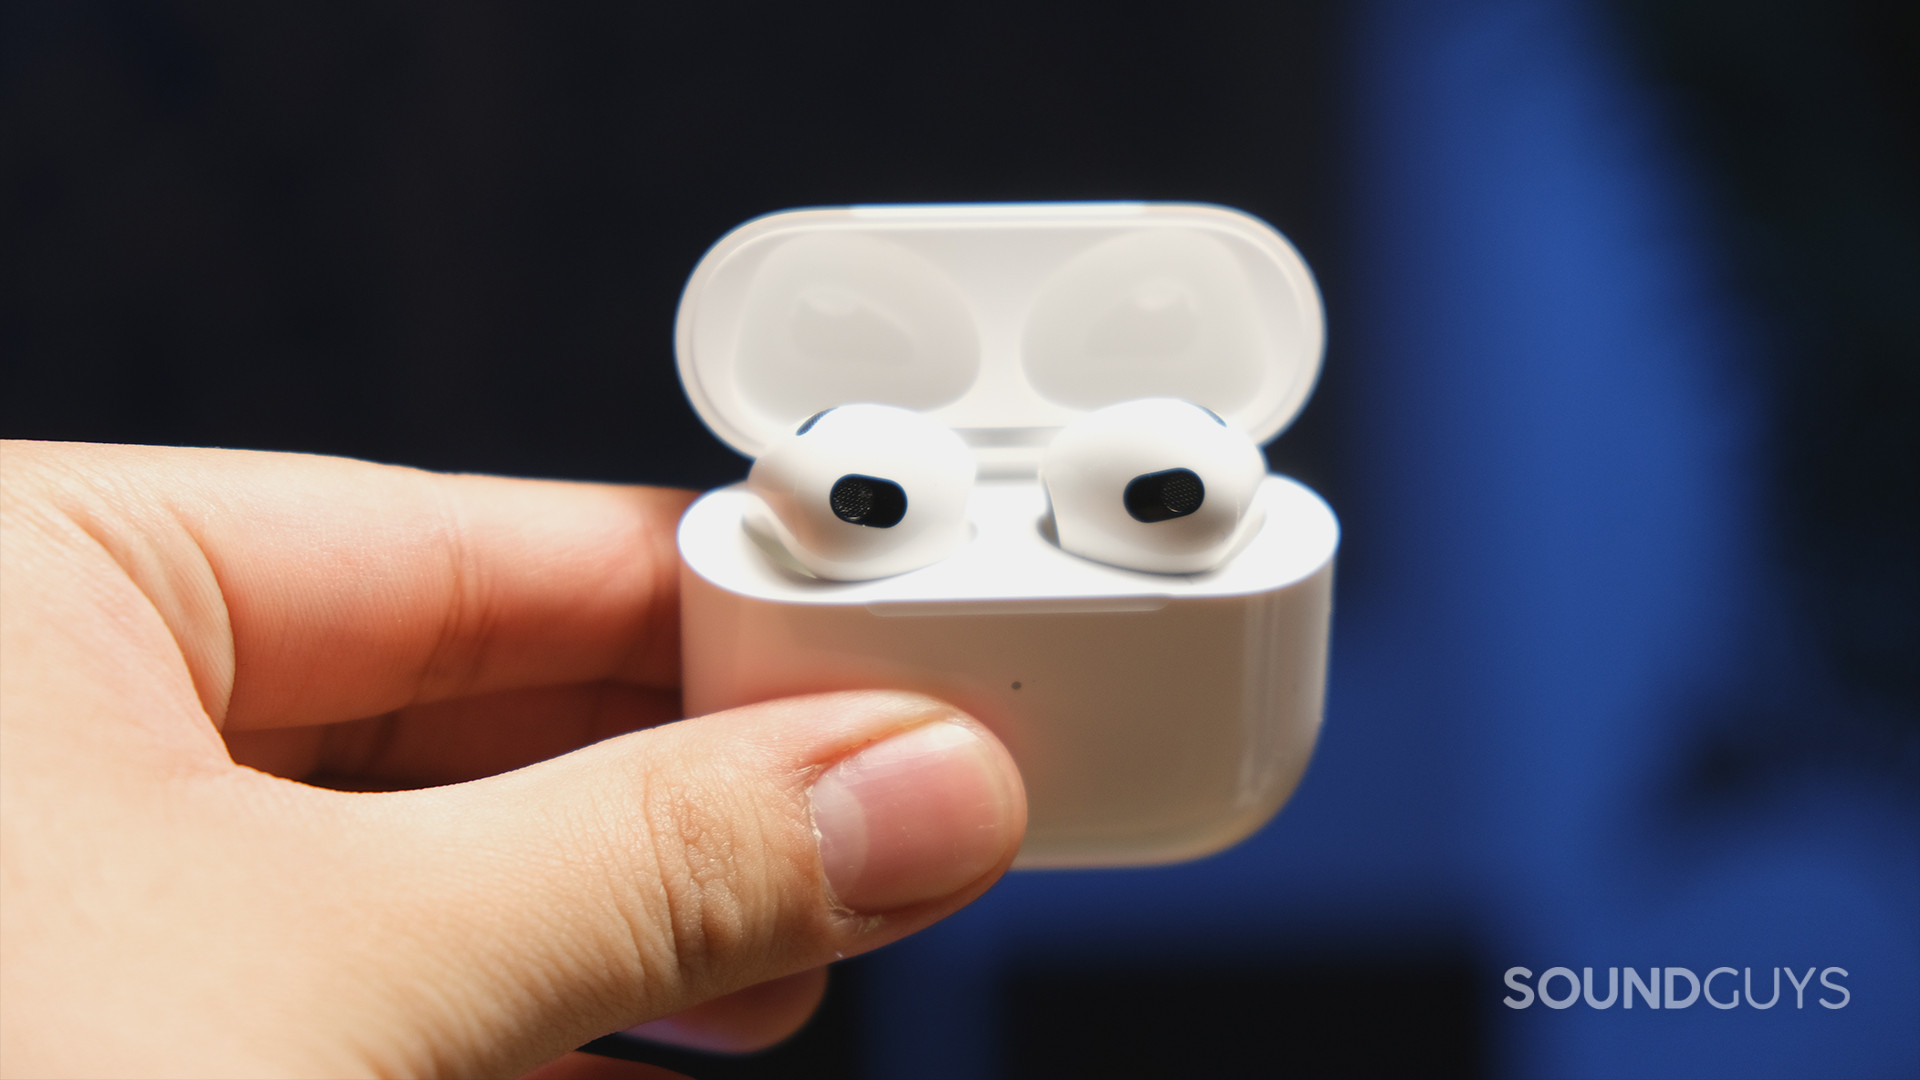 These $26 earbuds sound better than I expected, and I'm an